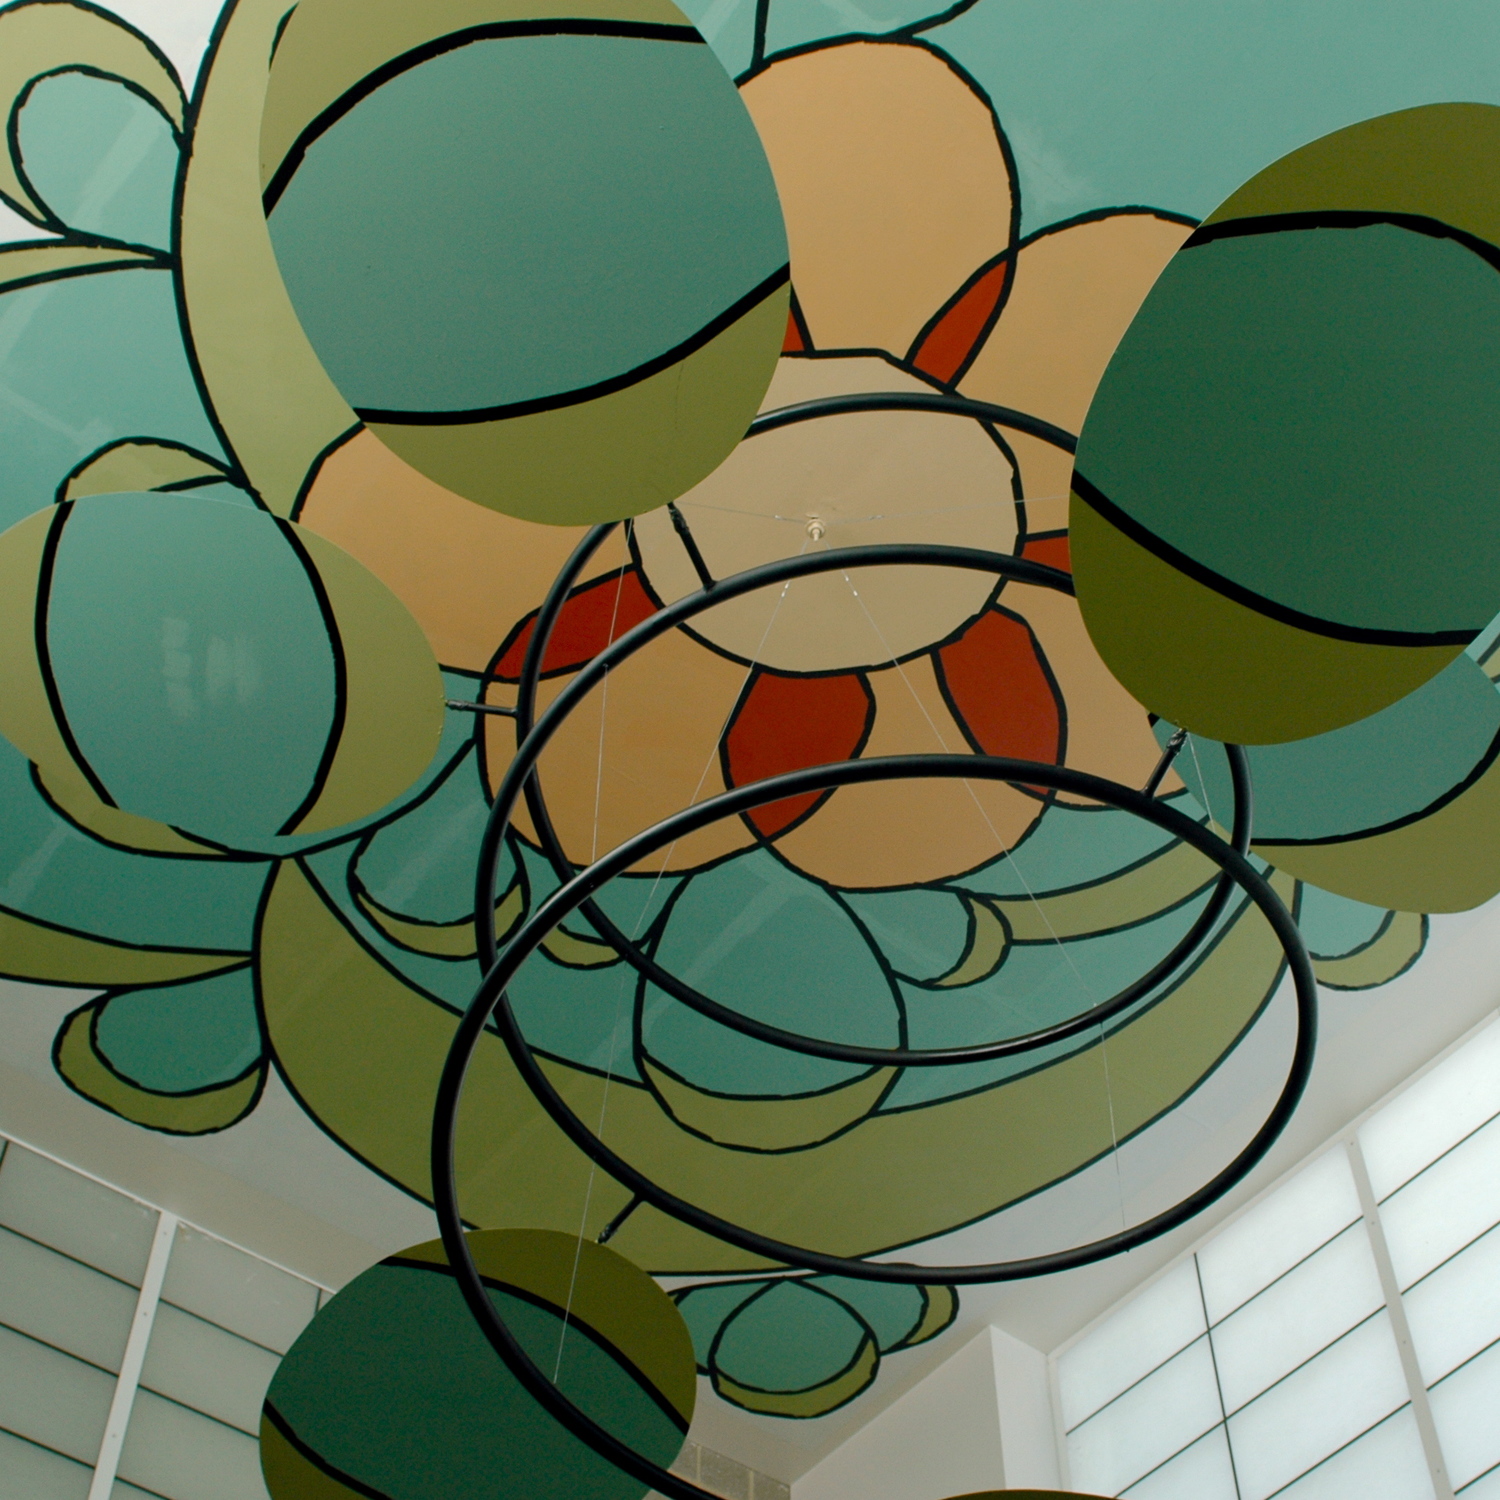 Colorful cartoon-like mural with hanging spiral mobiles on the ceiling